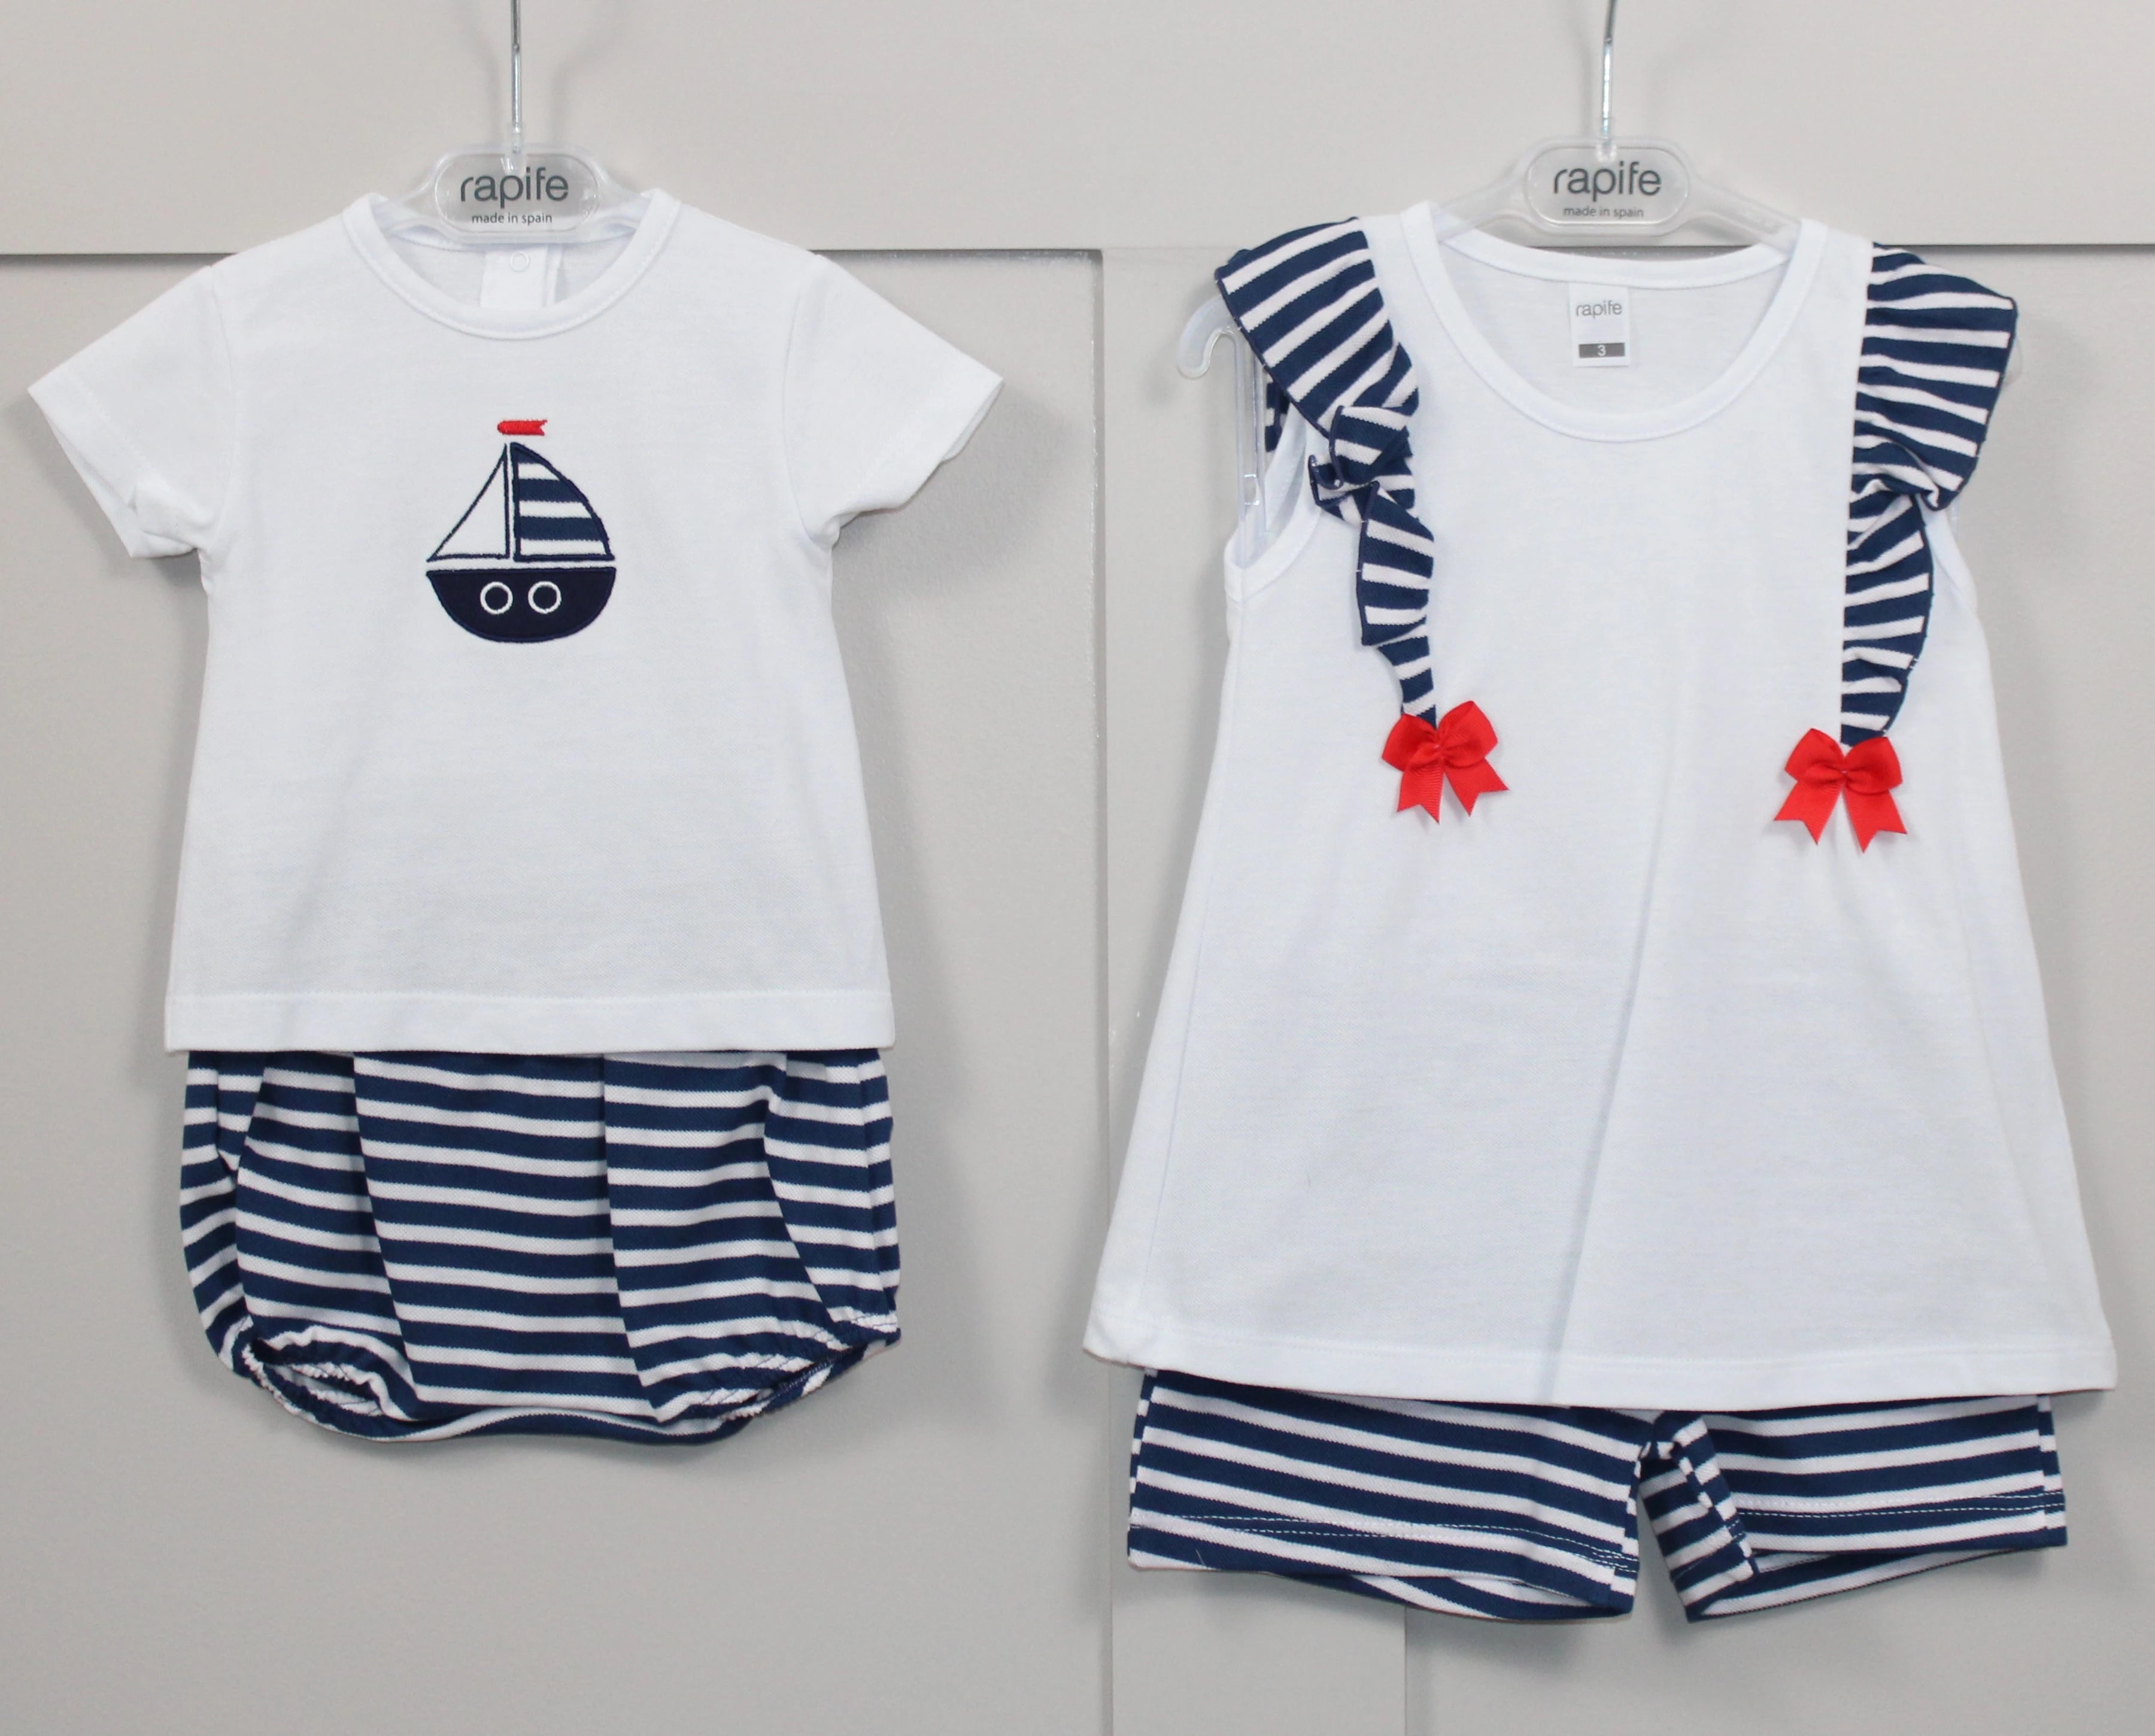 rapife nautical summer collection